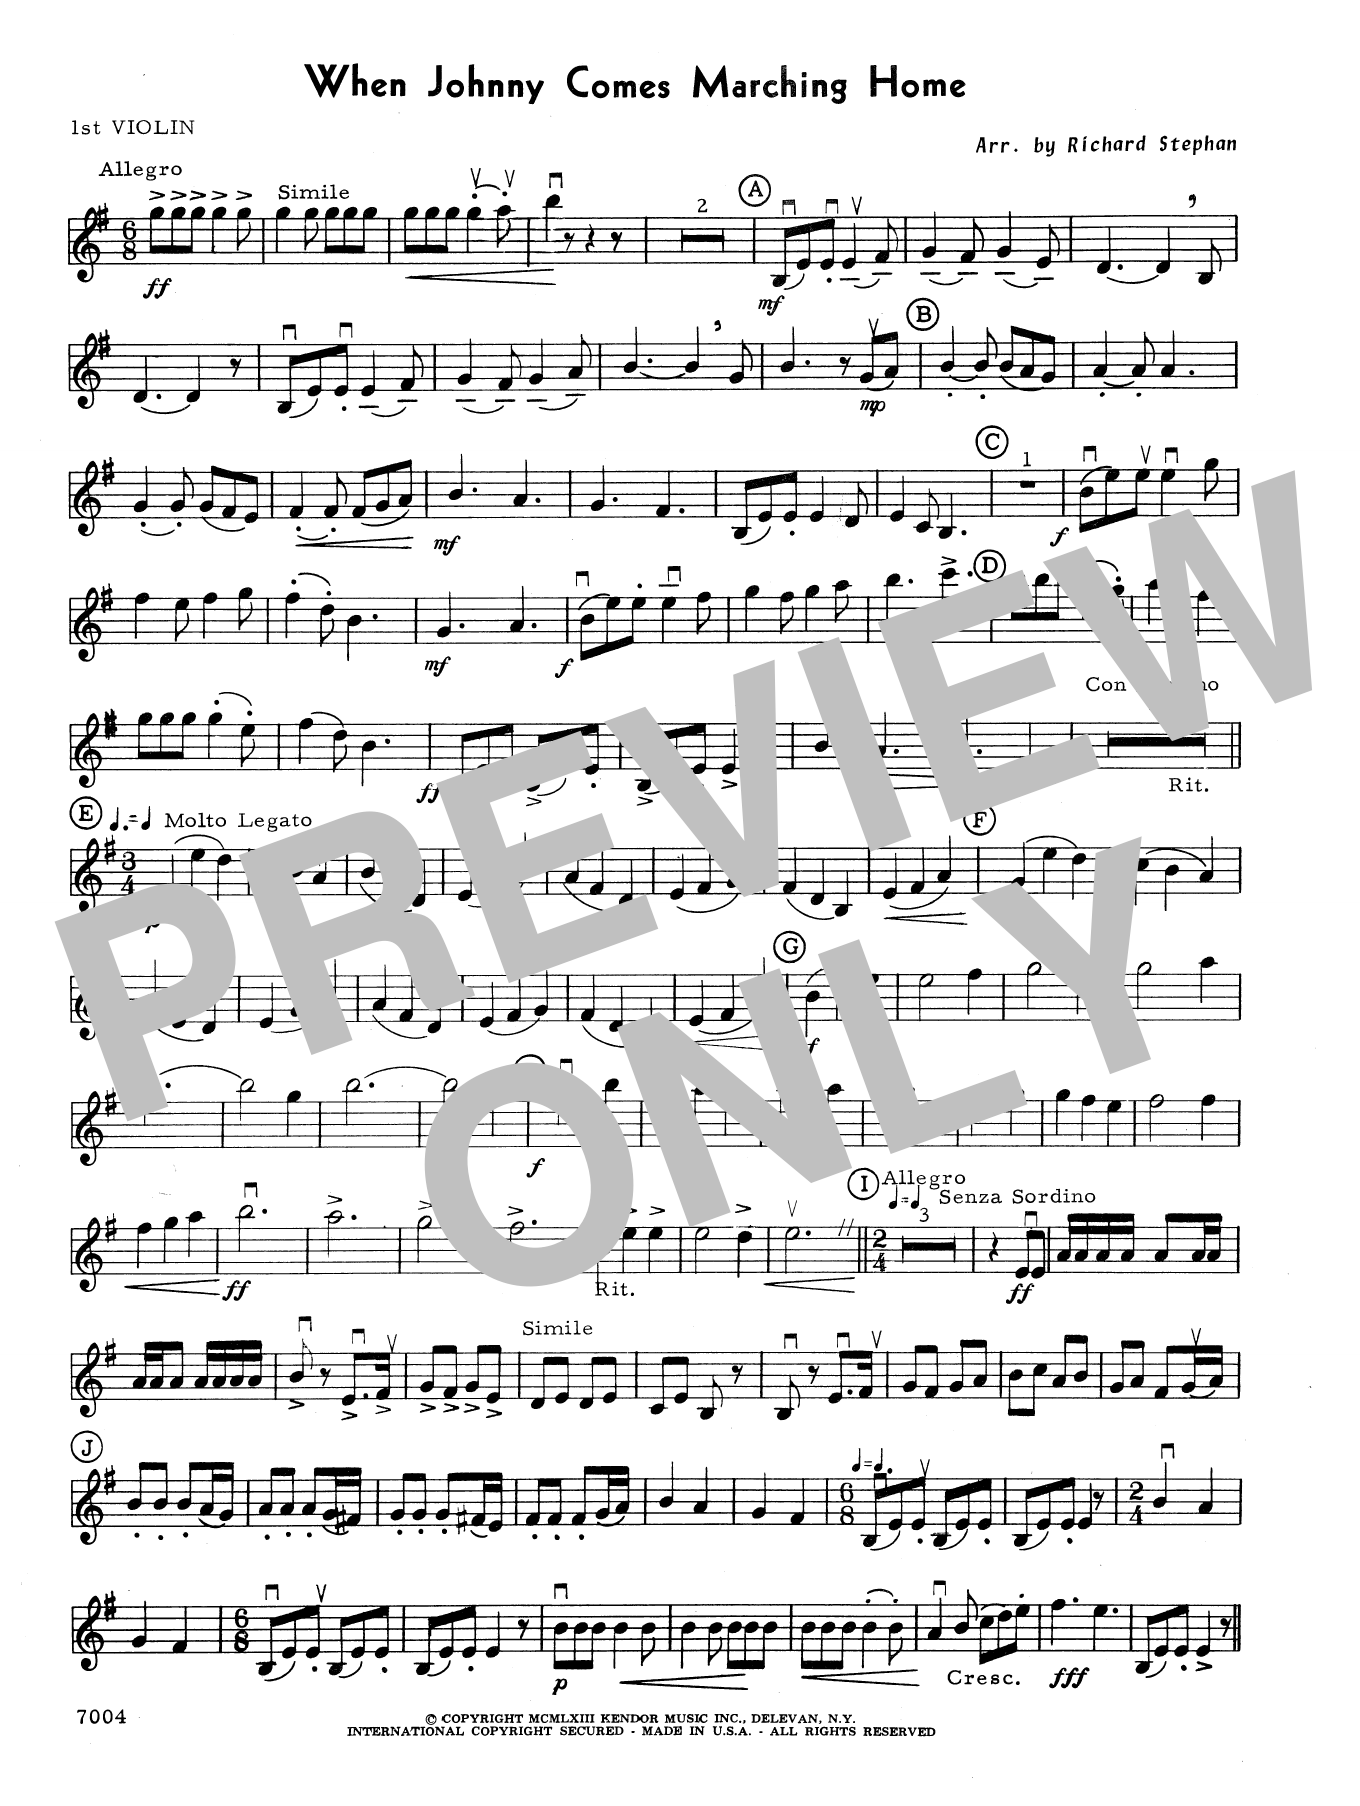 Download Richard Stephan When Johnny Comes Marching Home - 1st V Sheet Music